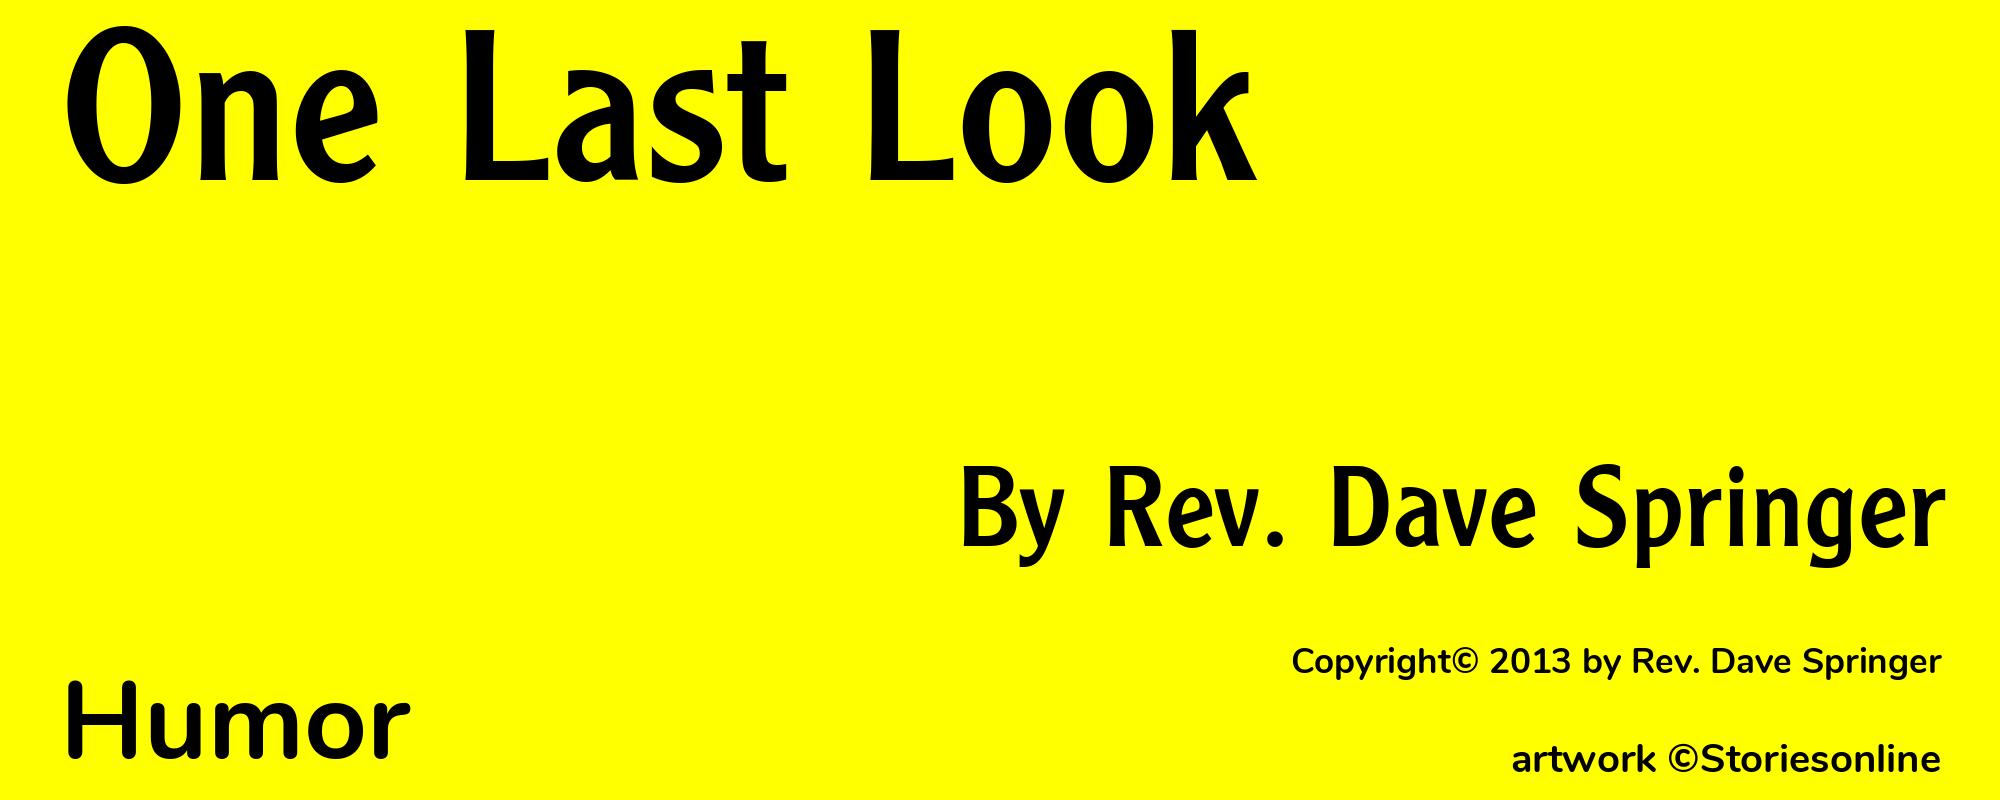 One Last Look - Cover